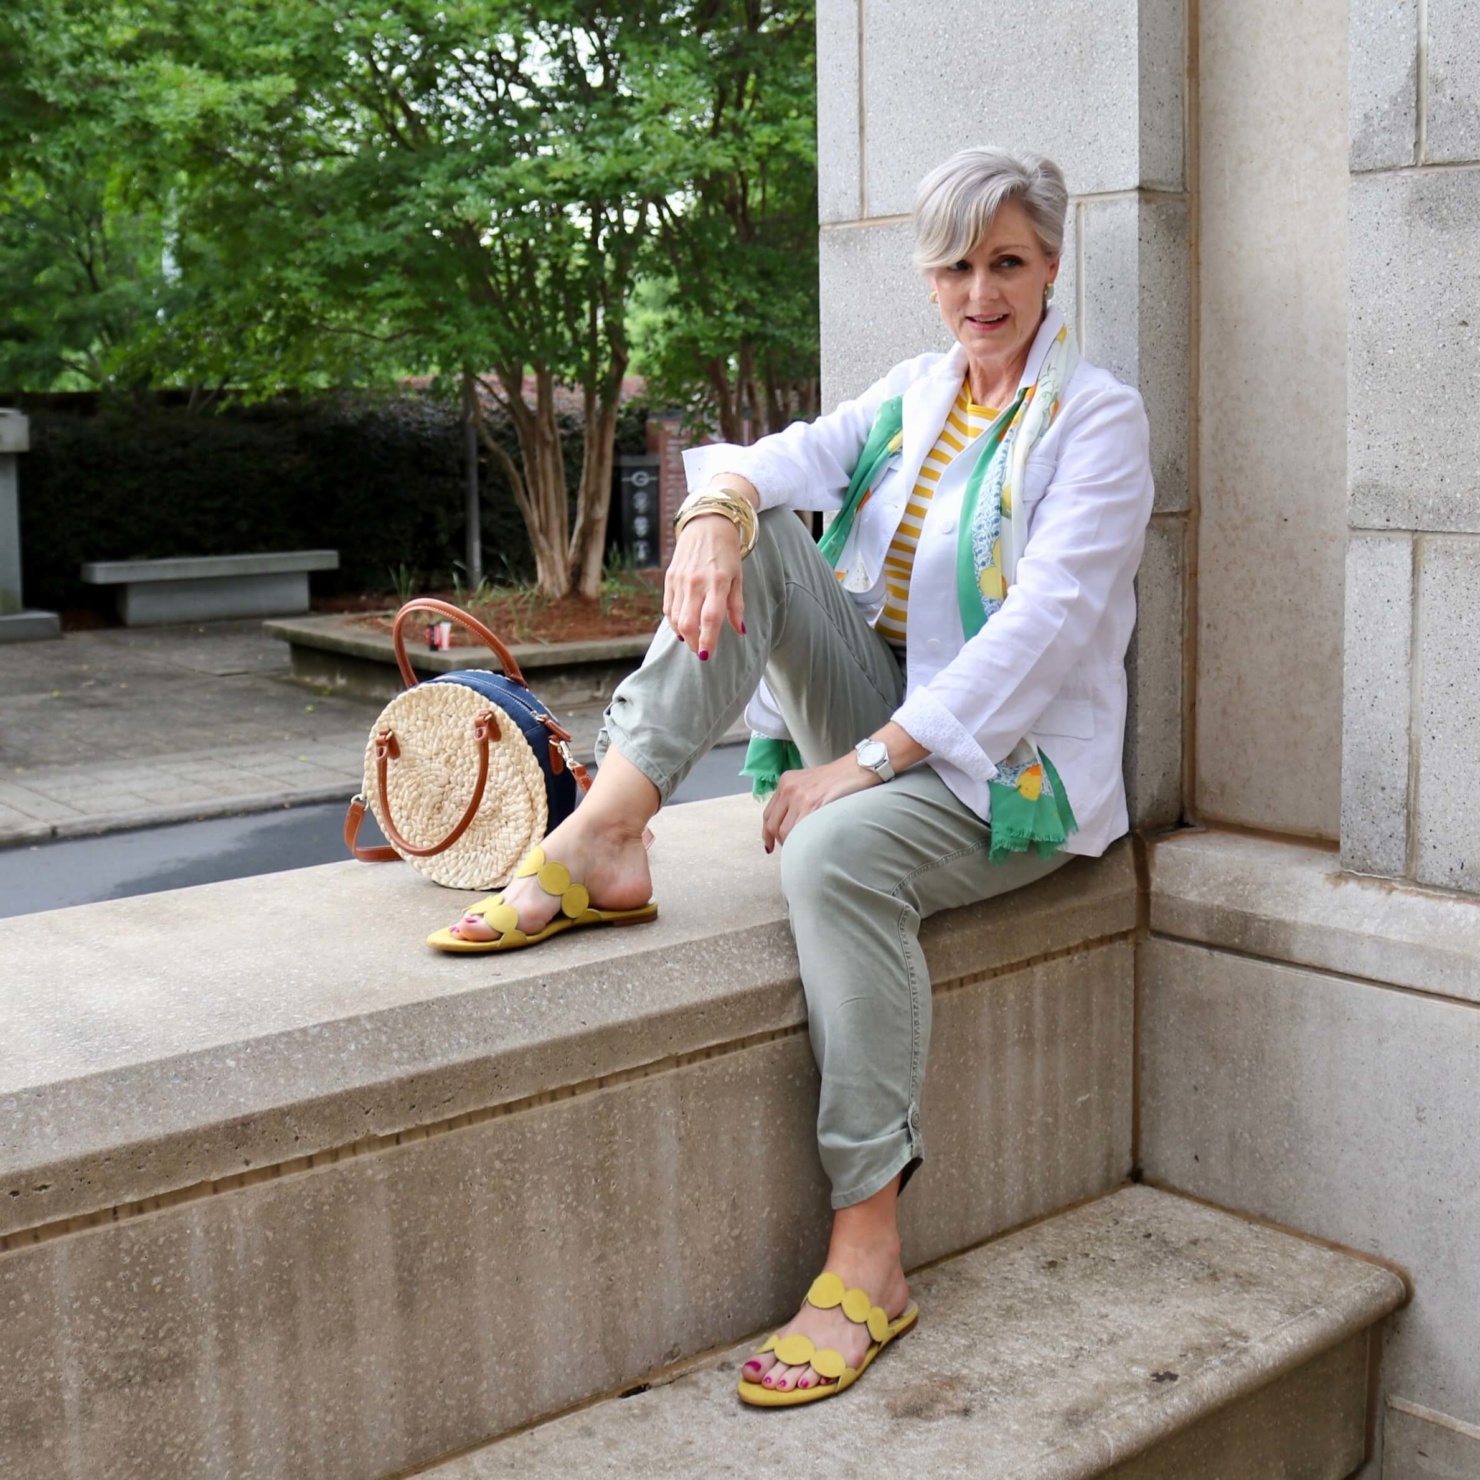 how to wear a jacket for spring and summer beth from Style at a Certain Age wears a white utility jacket, striped tee, green utility pants, yellow sandals, lemon scarf, and cornhusk handbag